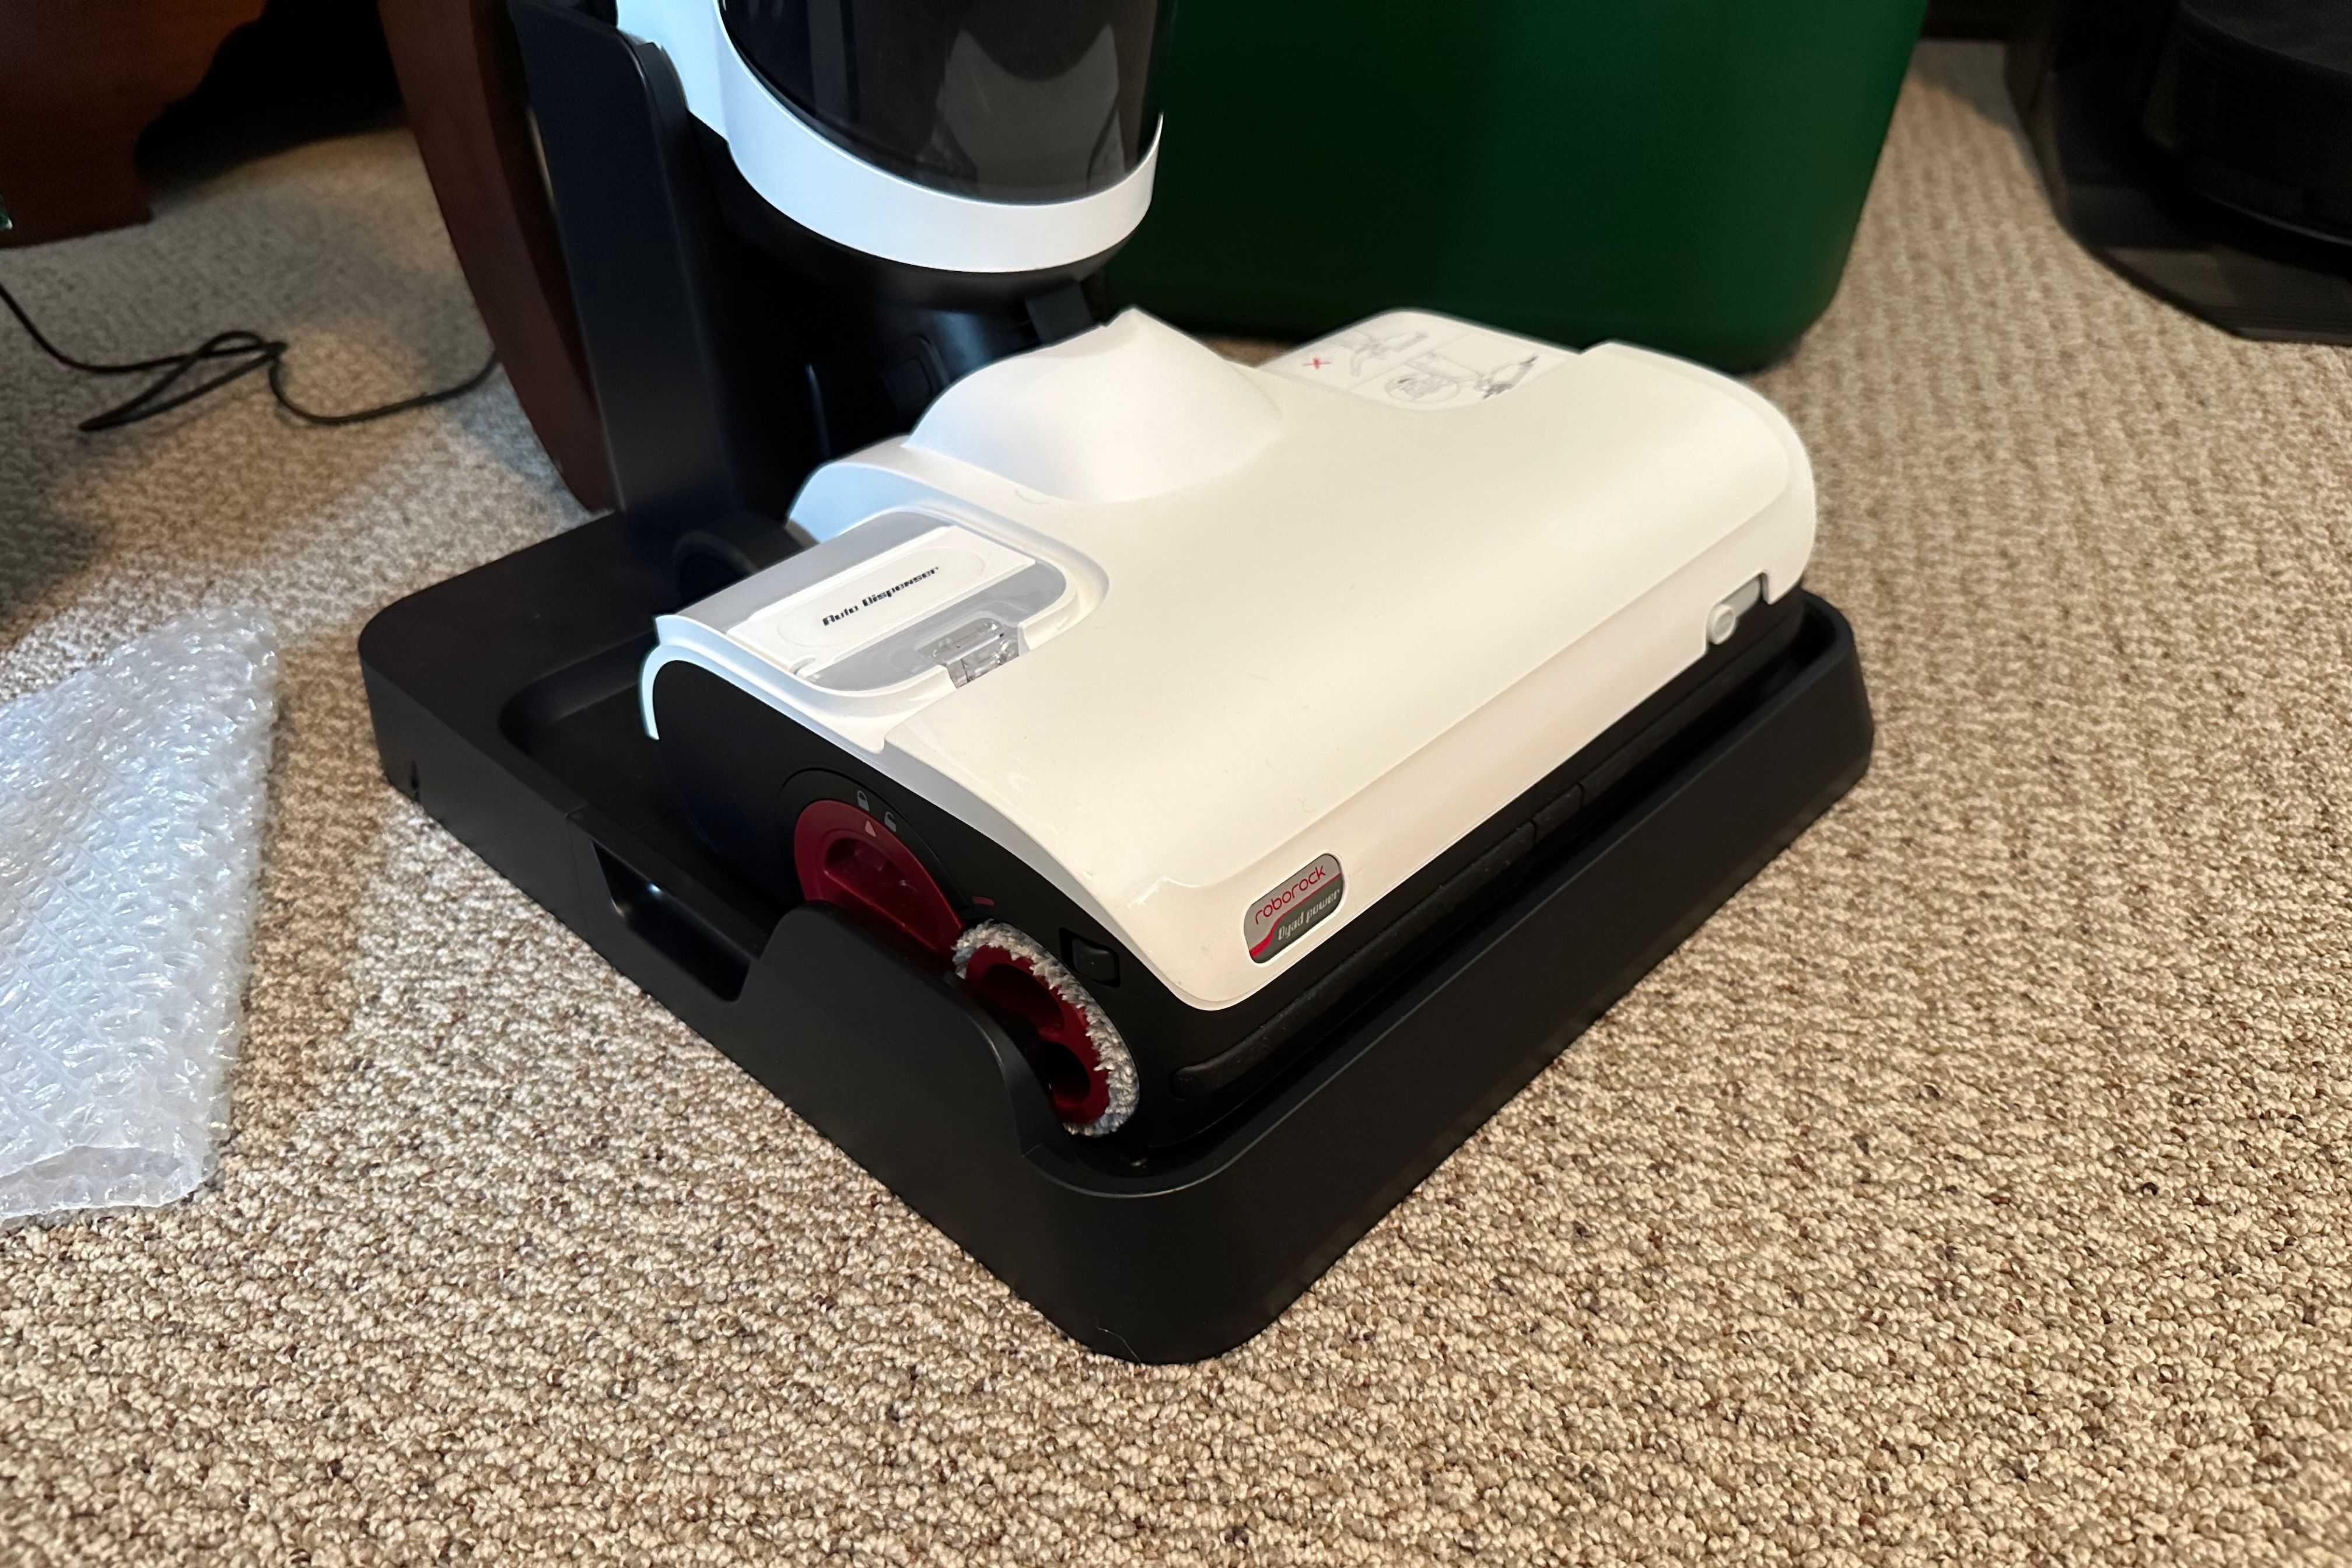 Shows the Roborock Dyad Pro in its charging dock on a carpeted floor